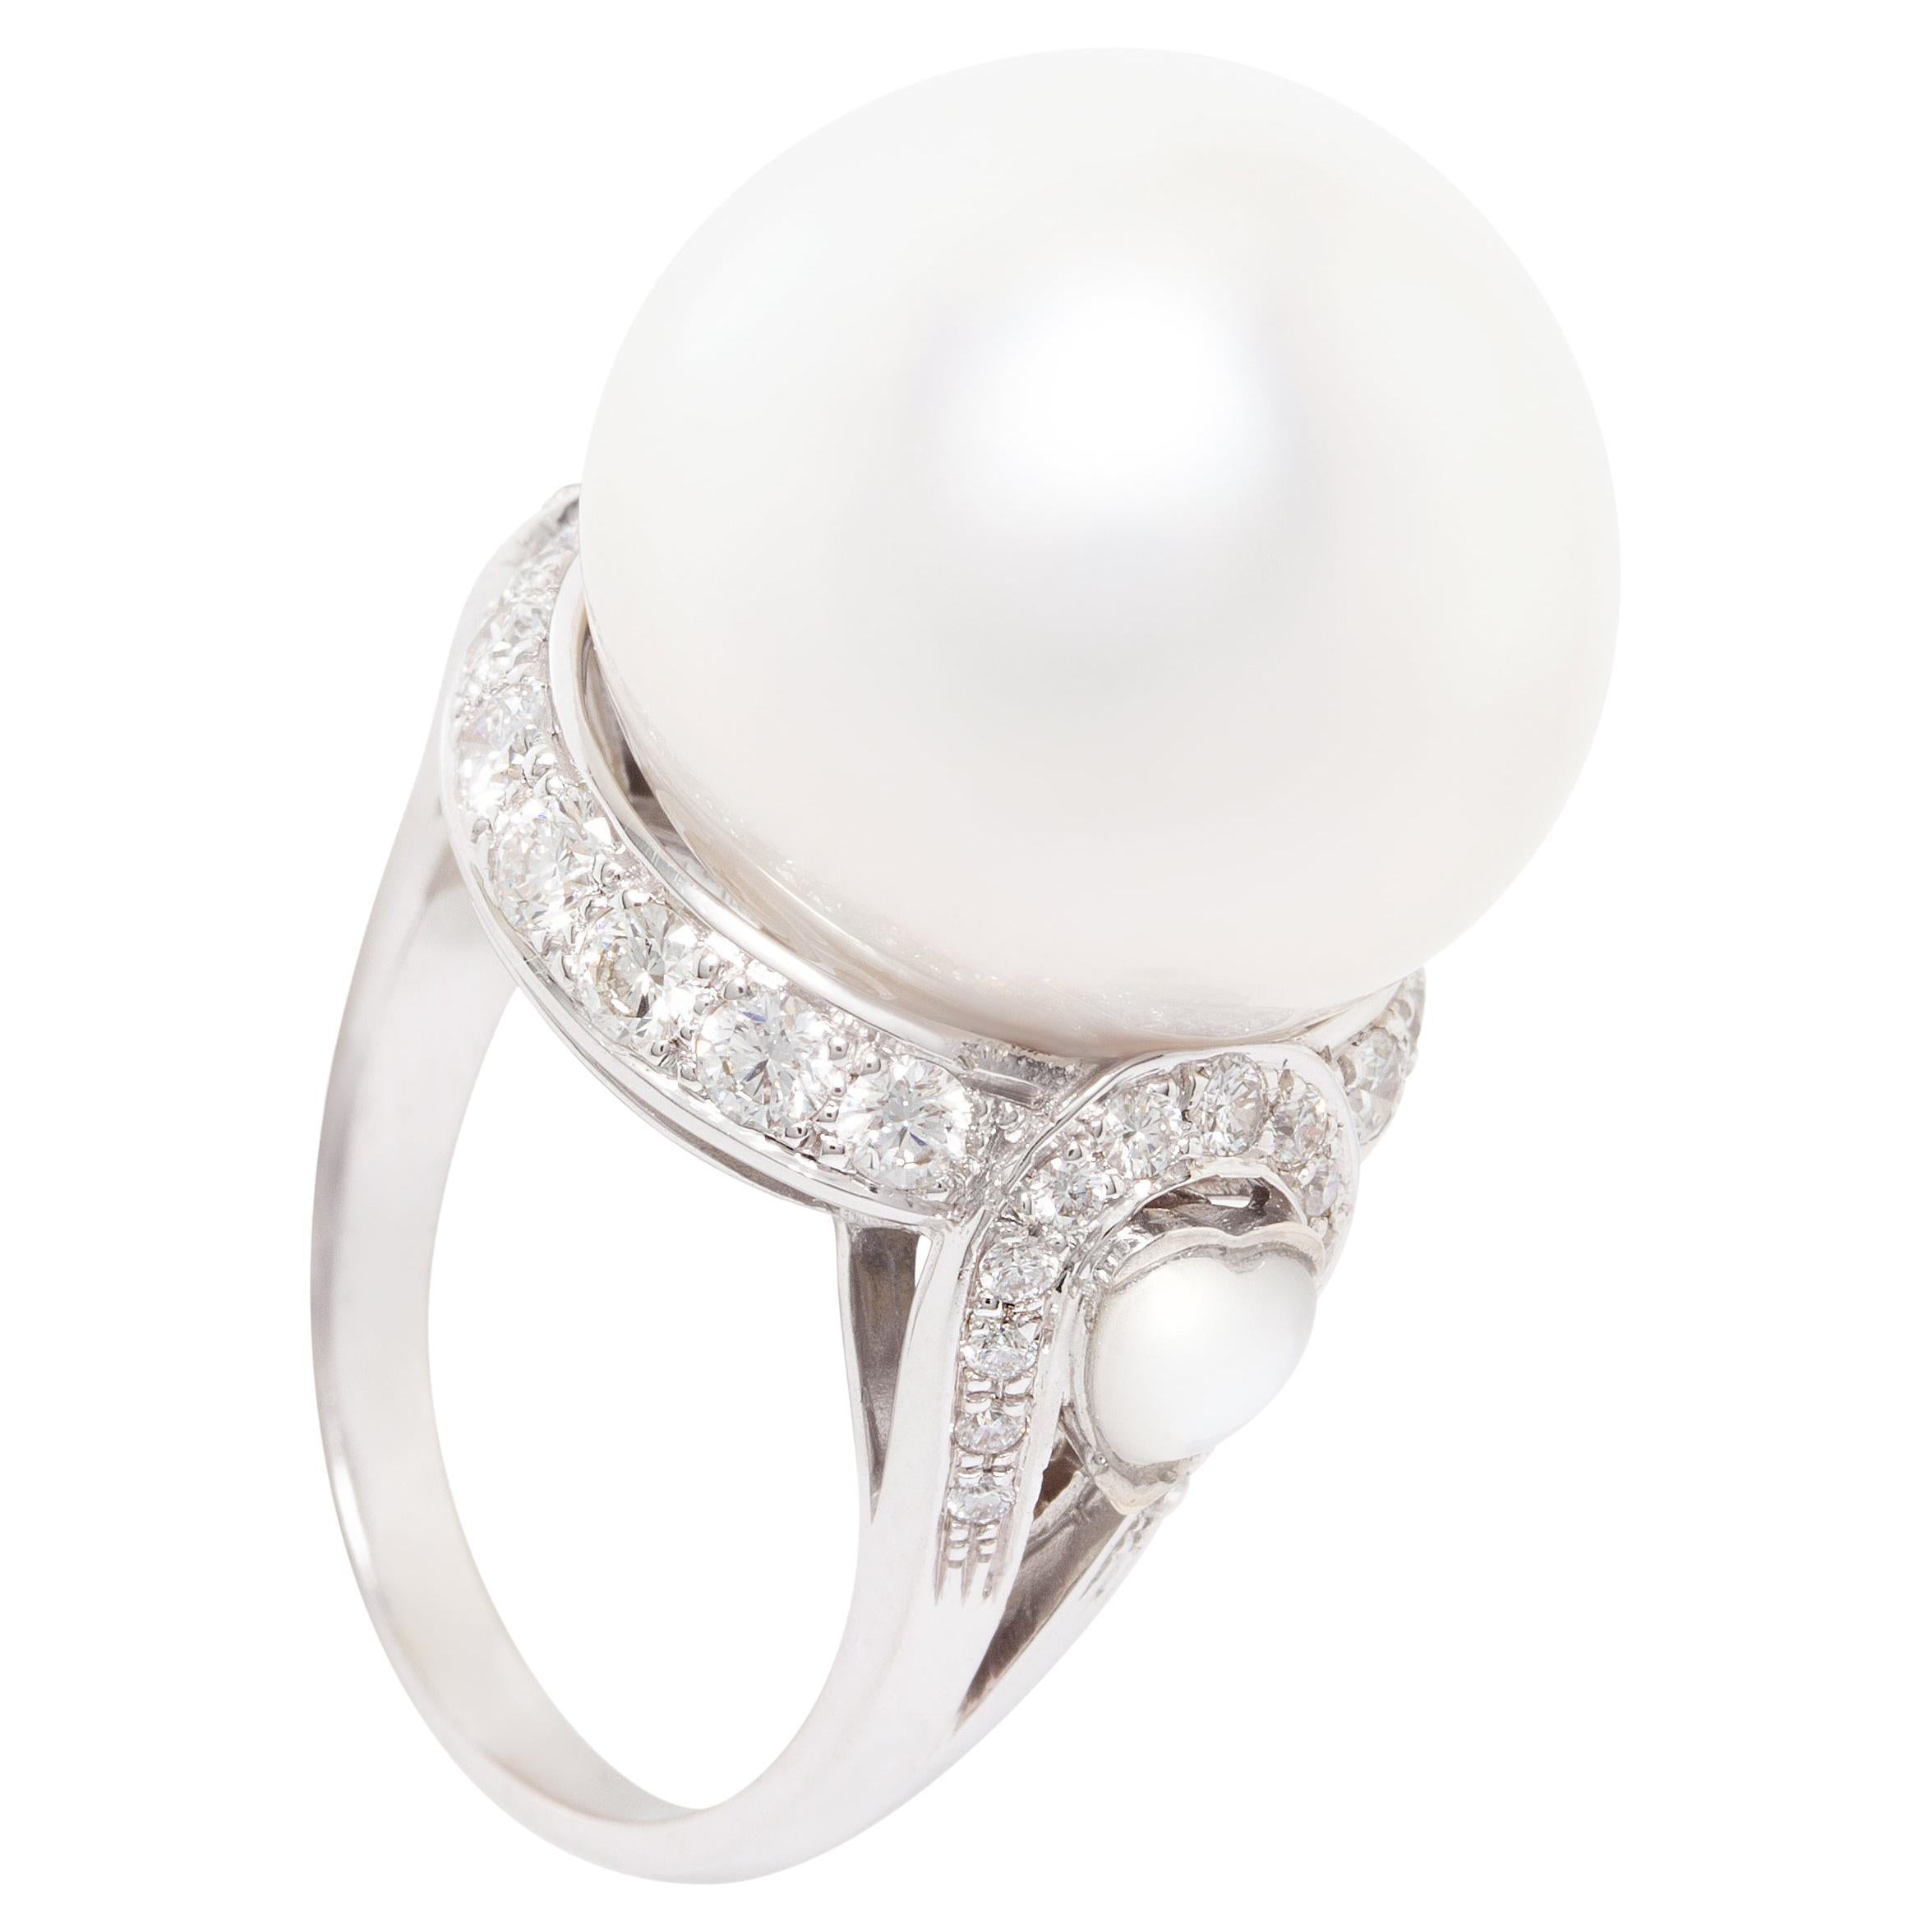 Ella Gafter 18mm South Sea Pearl Diamond Cocktail Ring For Sale